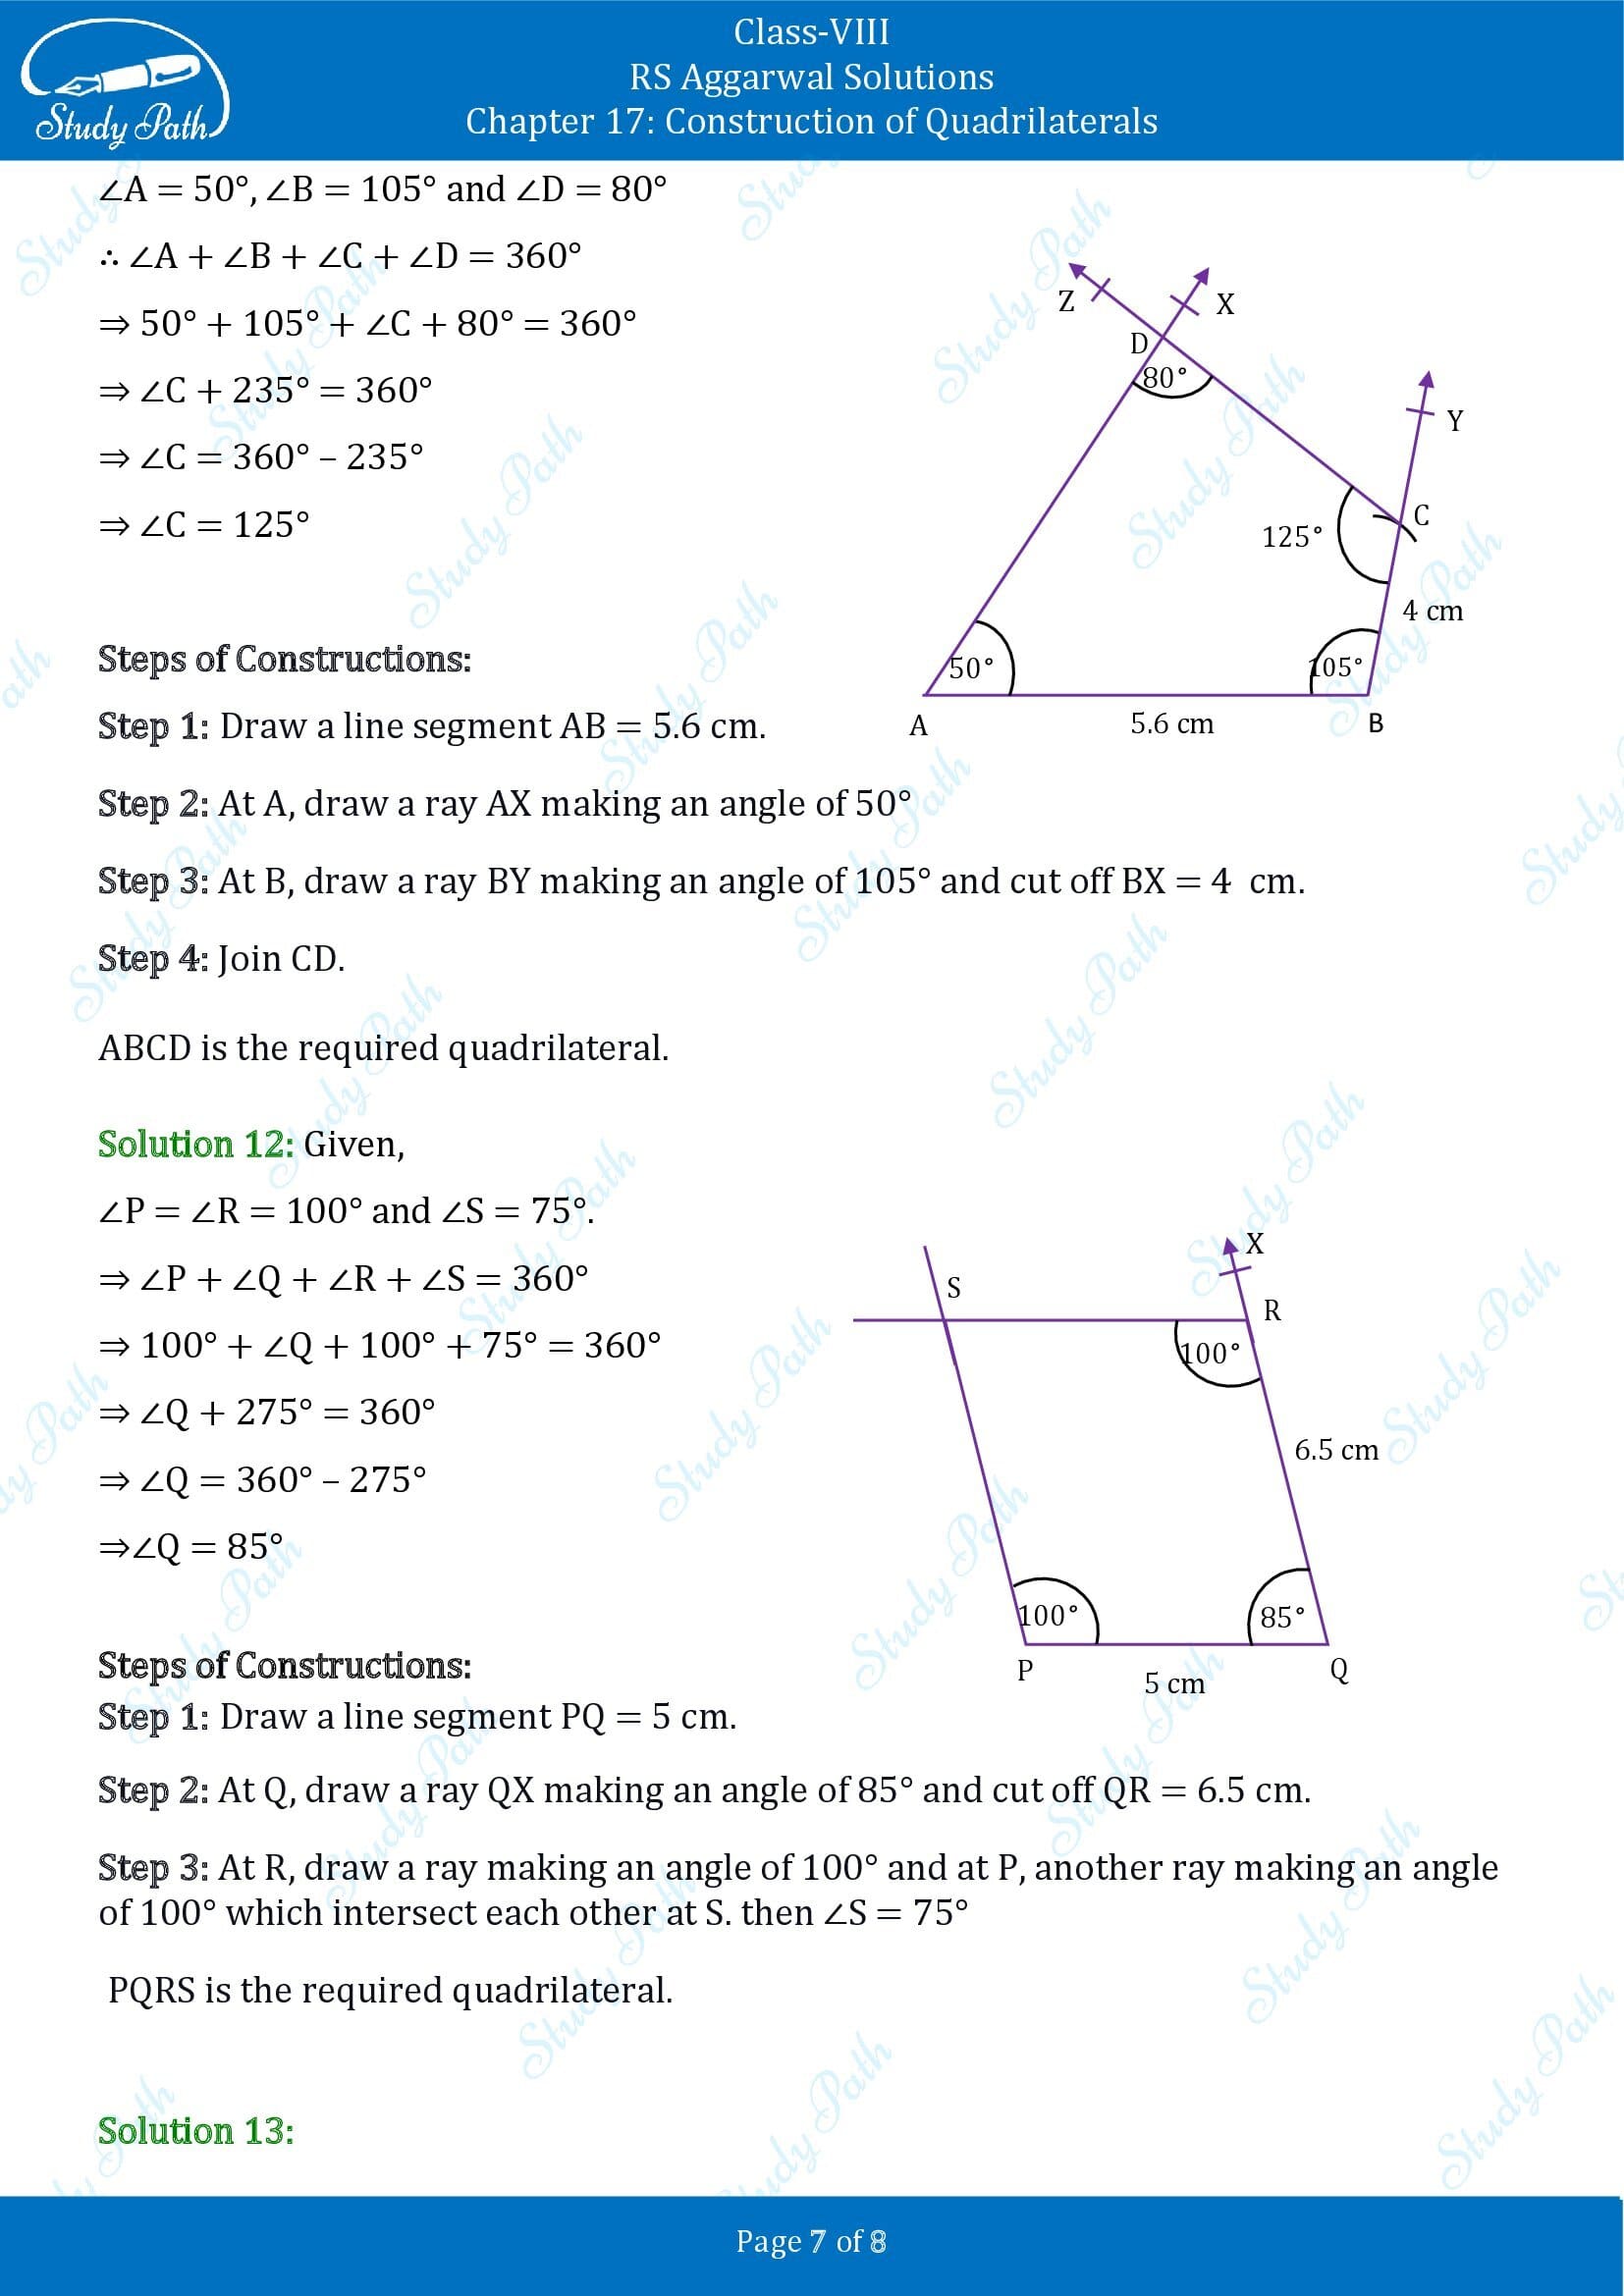 RS Aggarwal Solutions Class 8 Chapter 17 Construction of Quadrilaterals Exercise 17A 00007